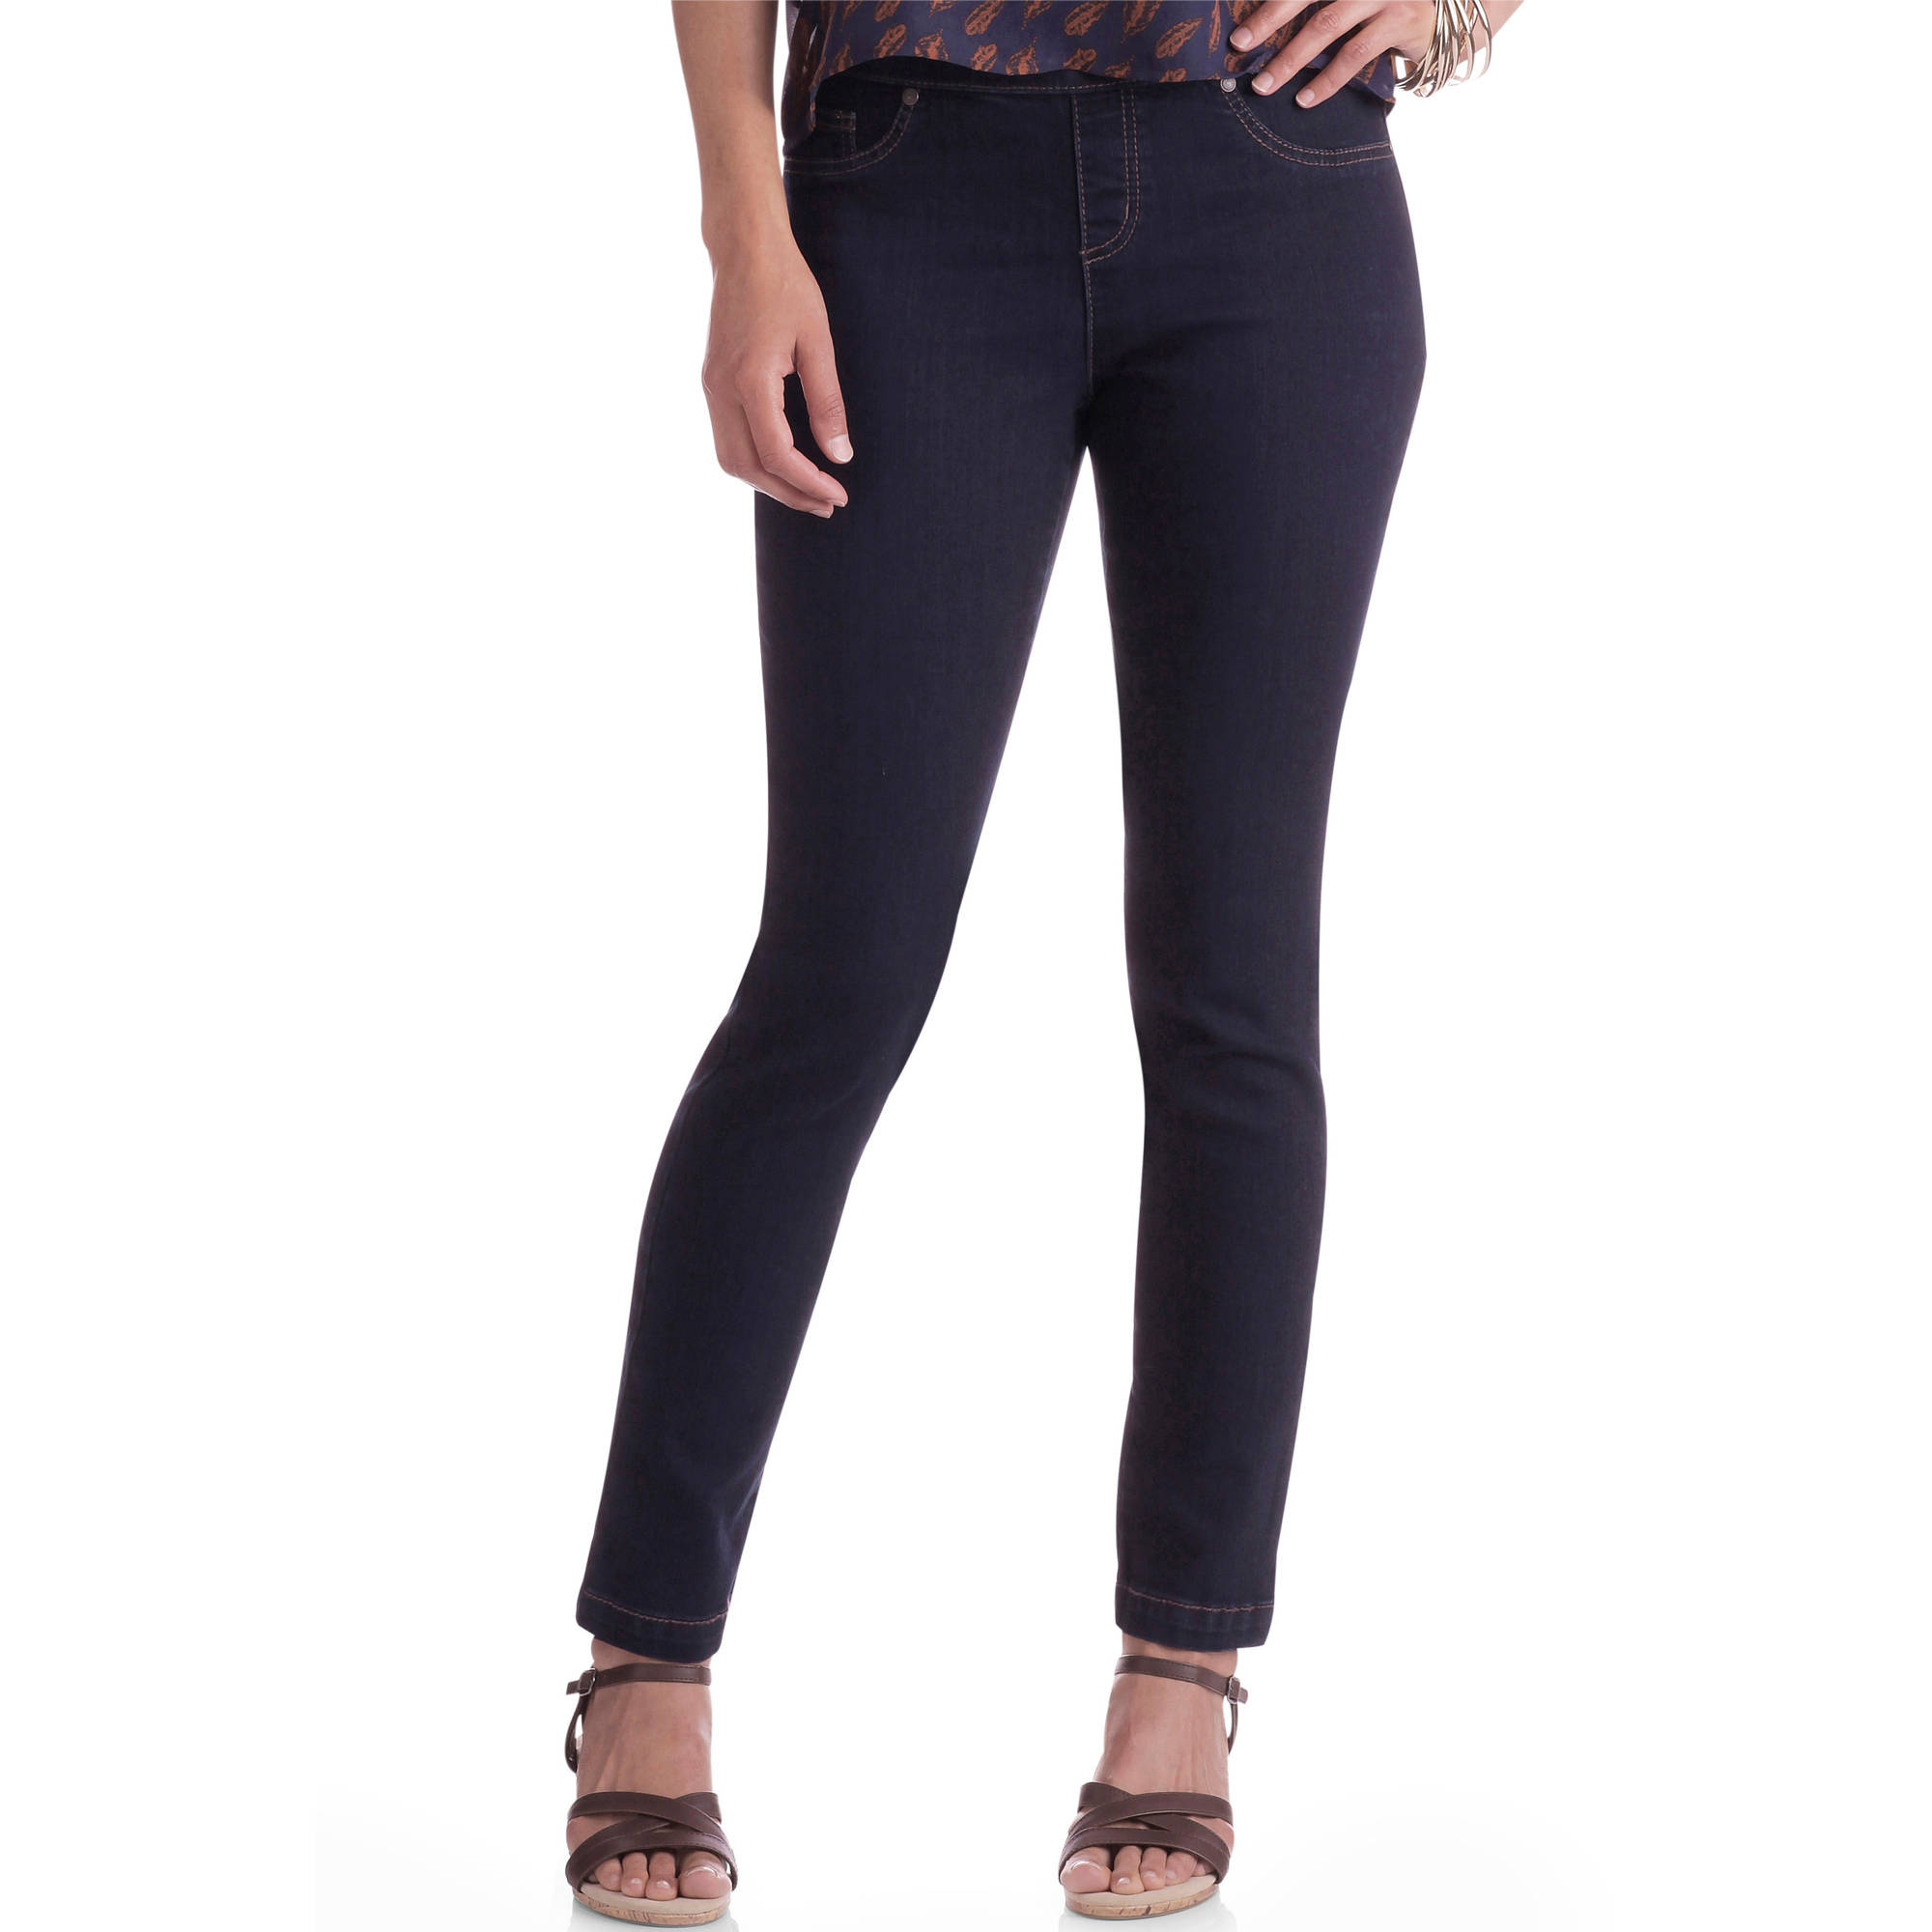 Women's Denim Jeggings available in Regular and Petite - image 1 of 1